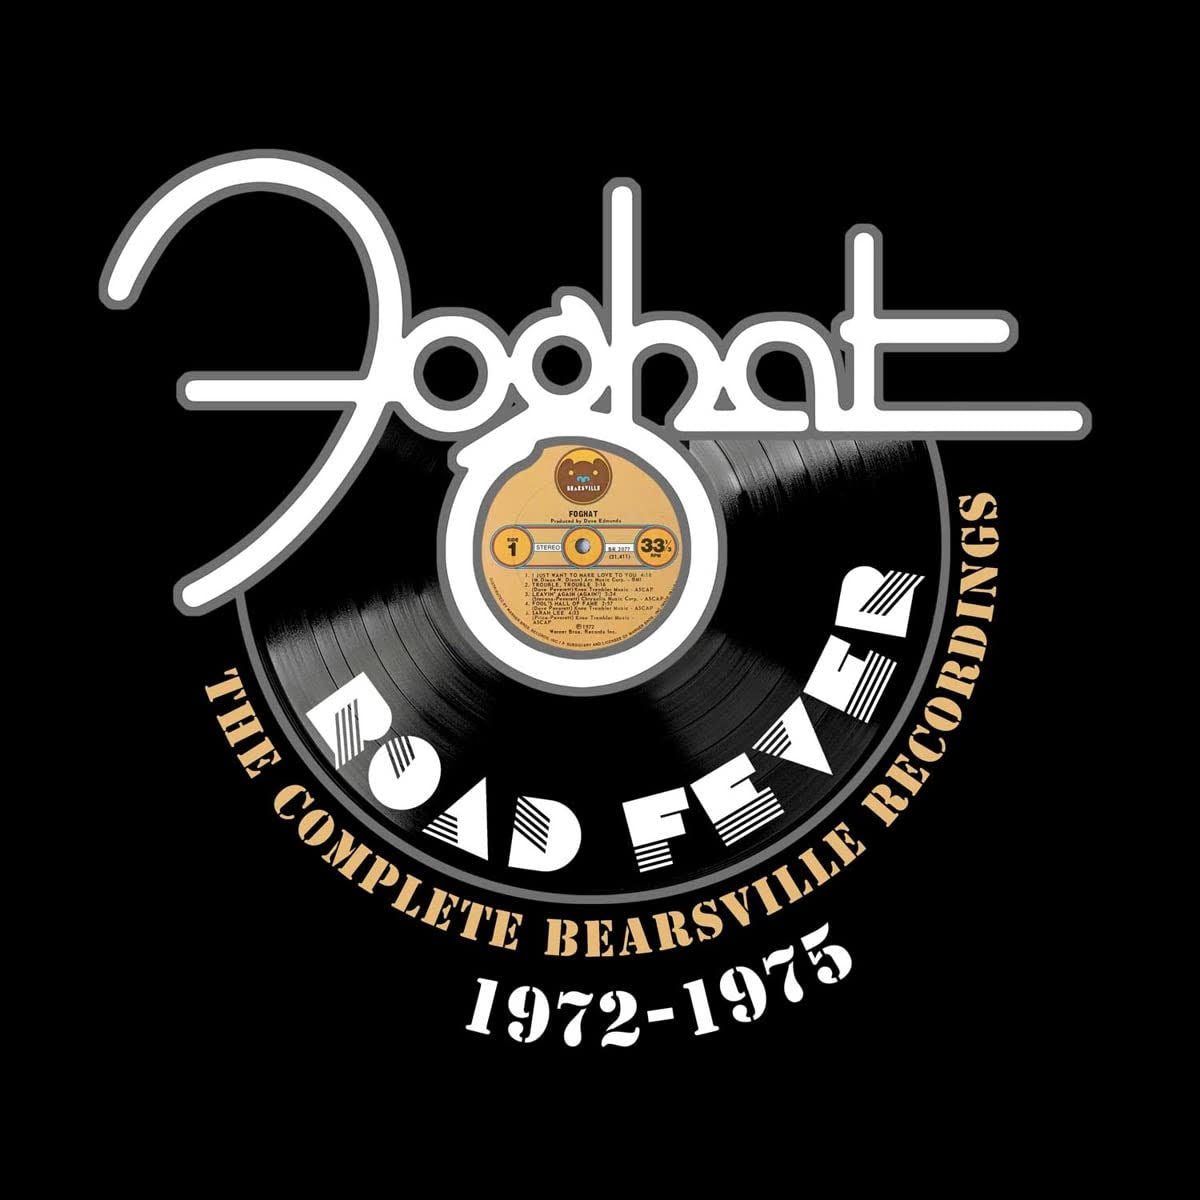 Foghat - Road Fever – The Complete Bearsville Recordings 1972-1975 (6 CD Box Set - Imported)